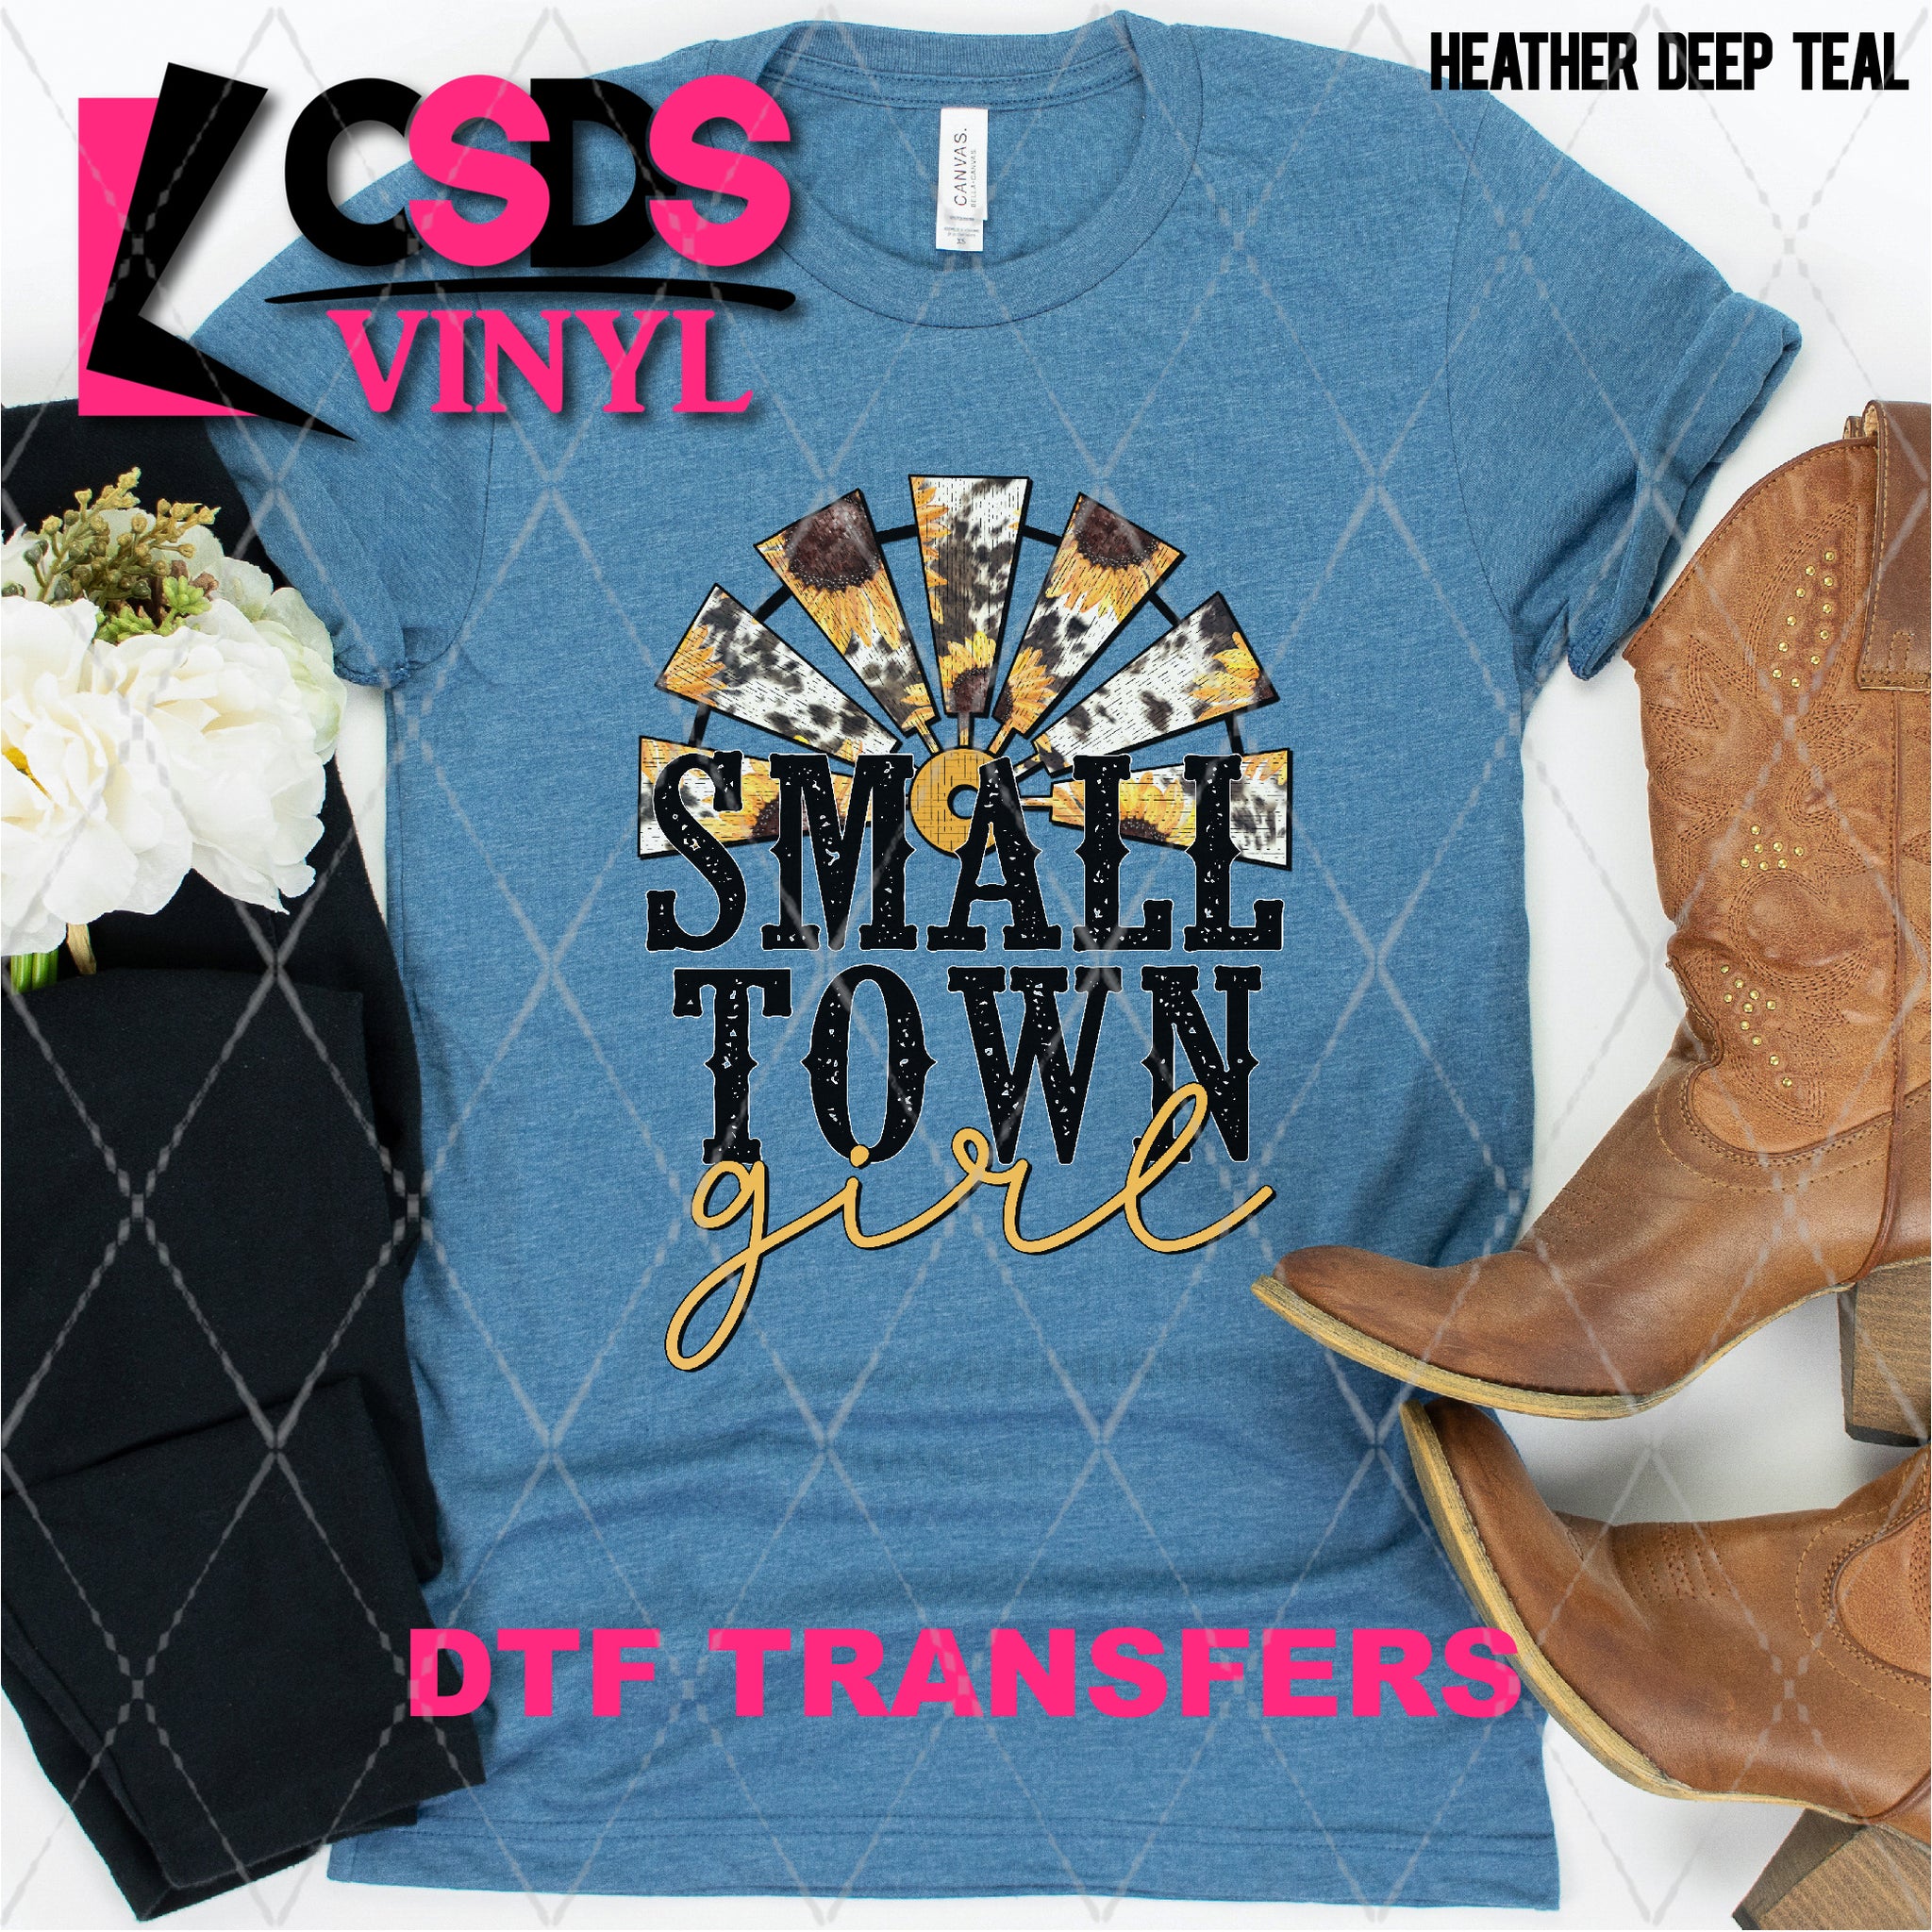 Small Towner (DTF/SUBLIMATION TRANSFER)